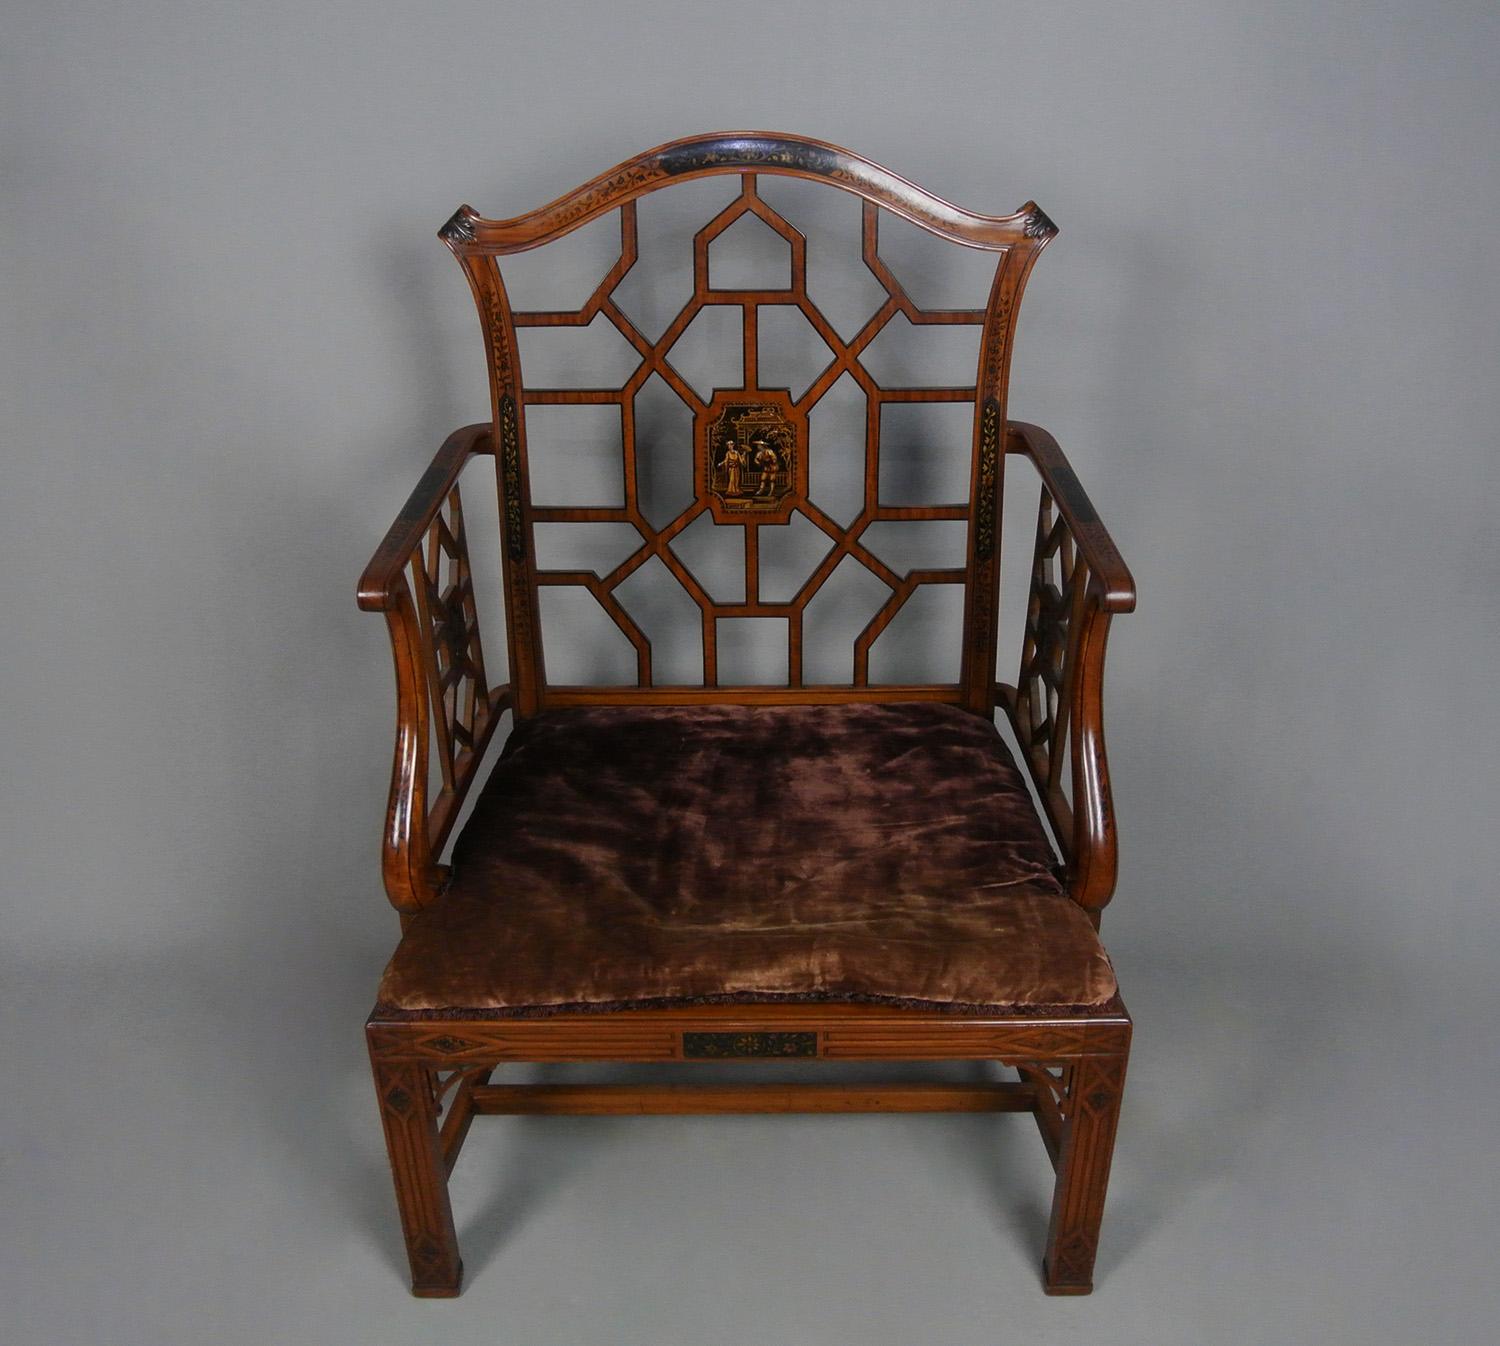 On behalf of a gentleman collector, a most beautiful and capacious satinwood Thomas Chippendale design cockpen armchair.   The whole with hand painted lacquer work panels of chinoiserie design of a courting couple in a Chinese garden, doves, flowers